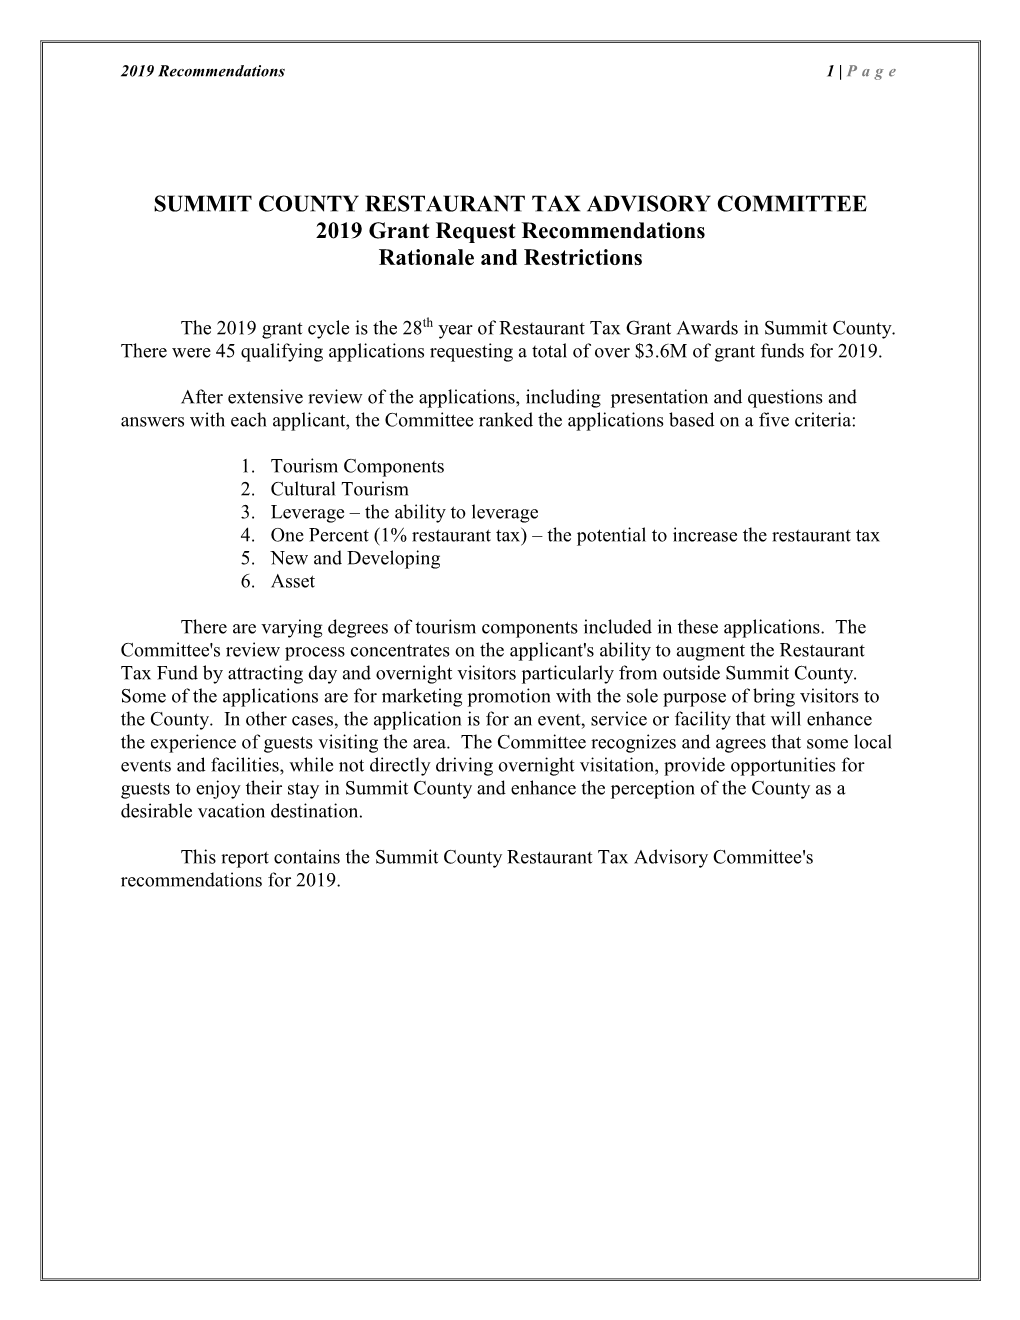 SUMMIT COUNTY RESTAURANT TAX ADVISORY COMMITTEE 2019 Grant Request Recommendations Rationale and Restrictions